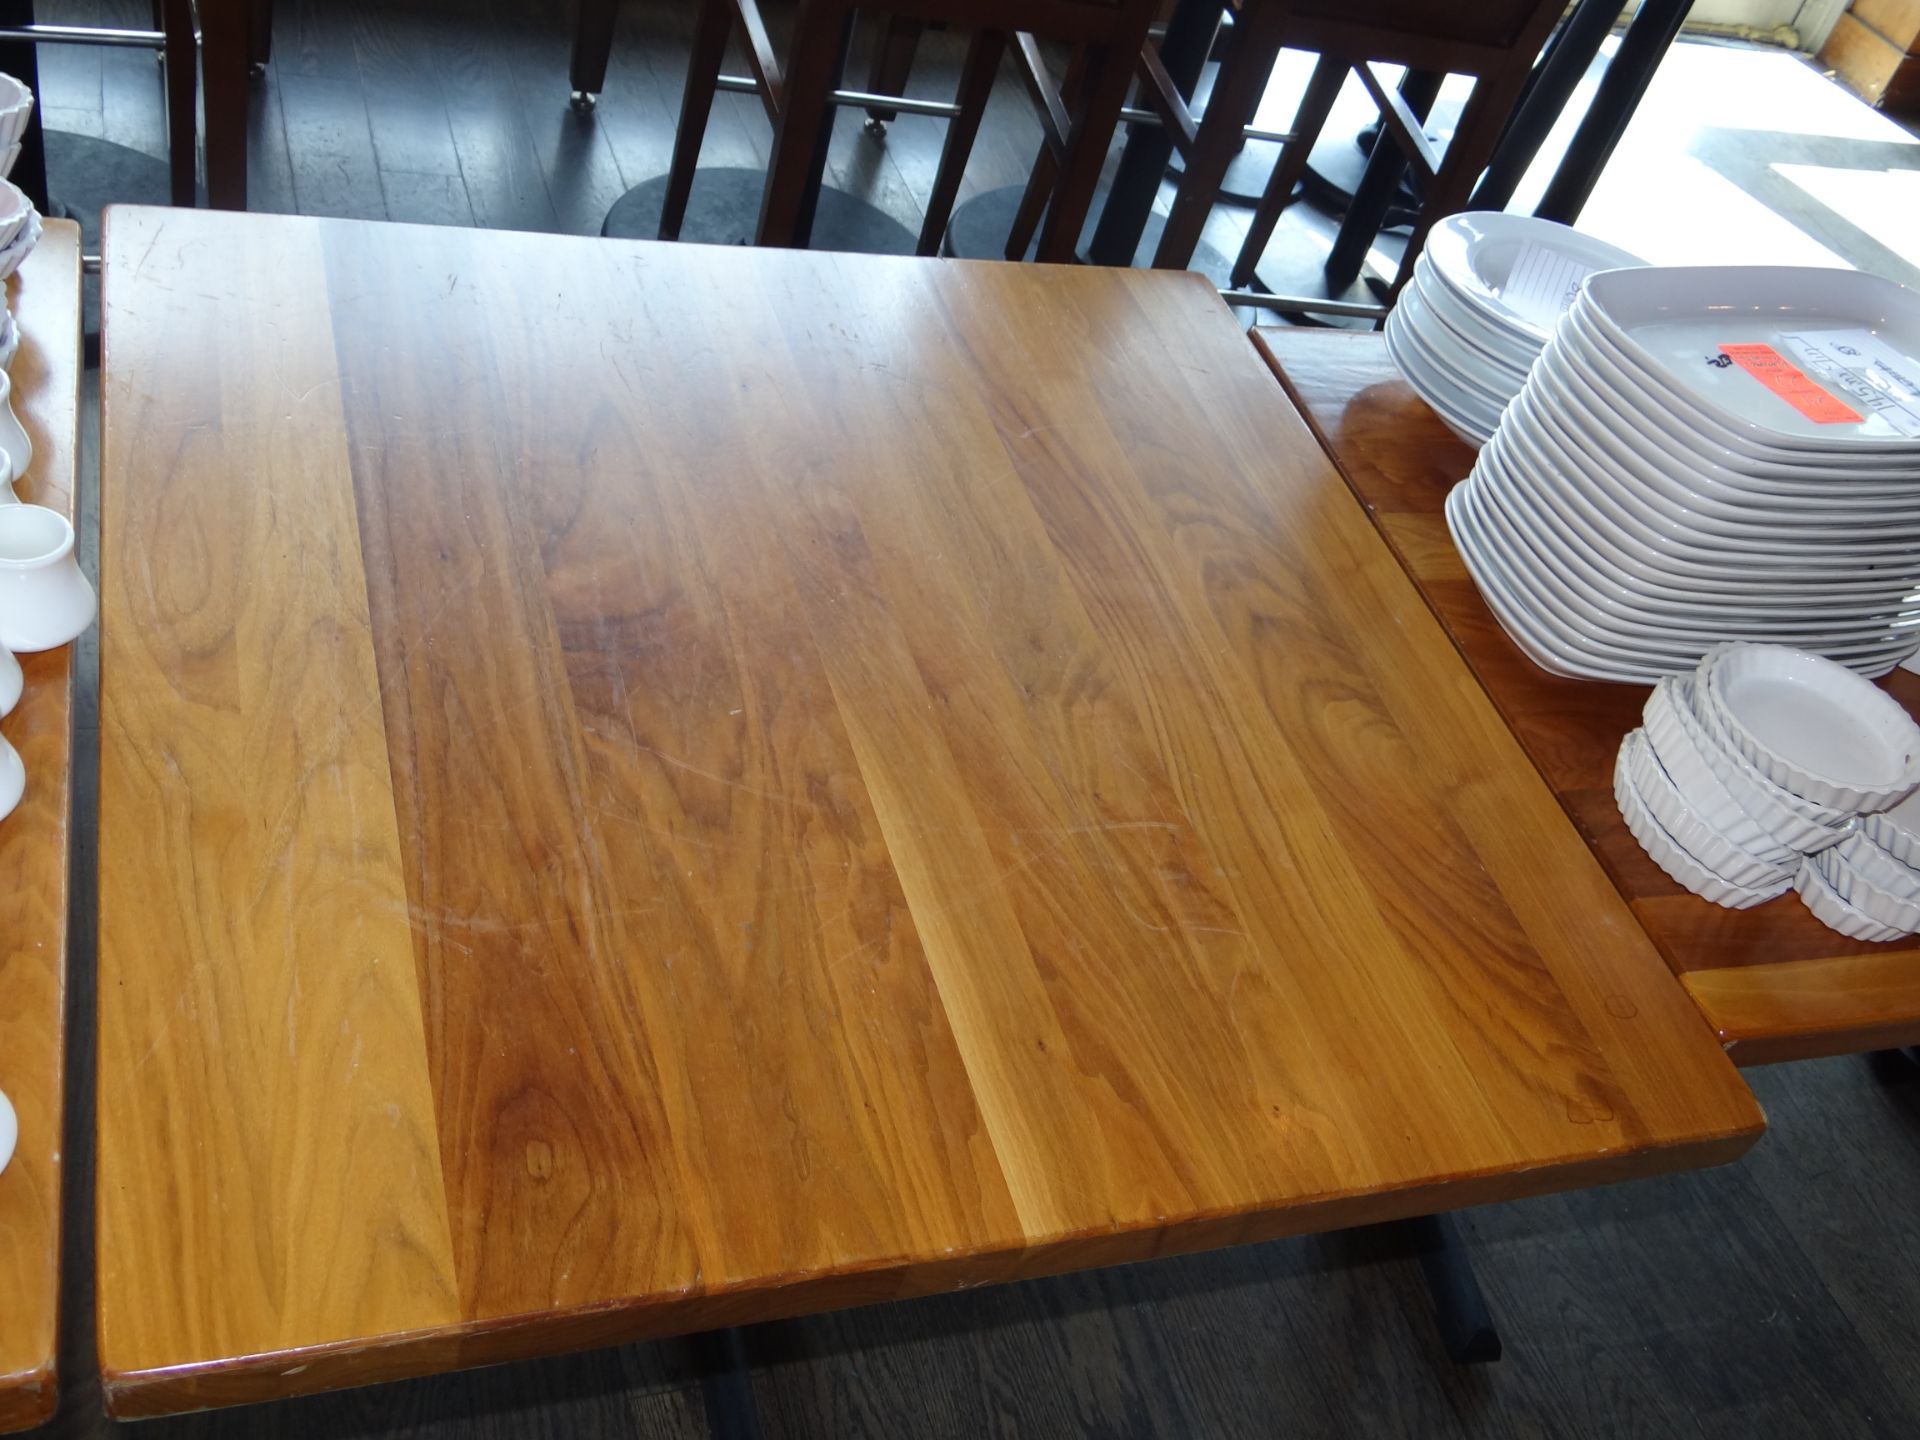 (3) 36" X 36" Solid Cherry Wood Tables with Base